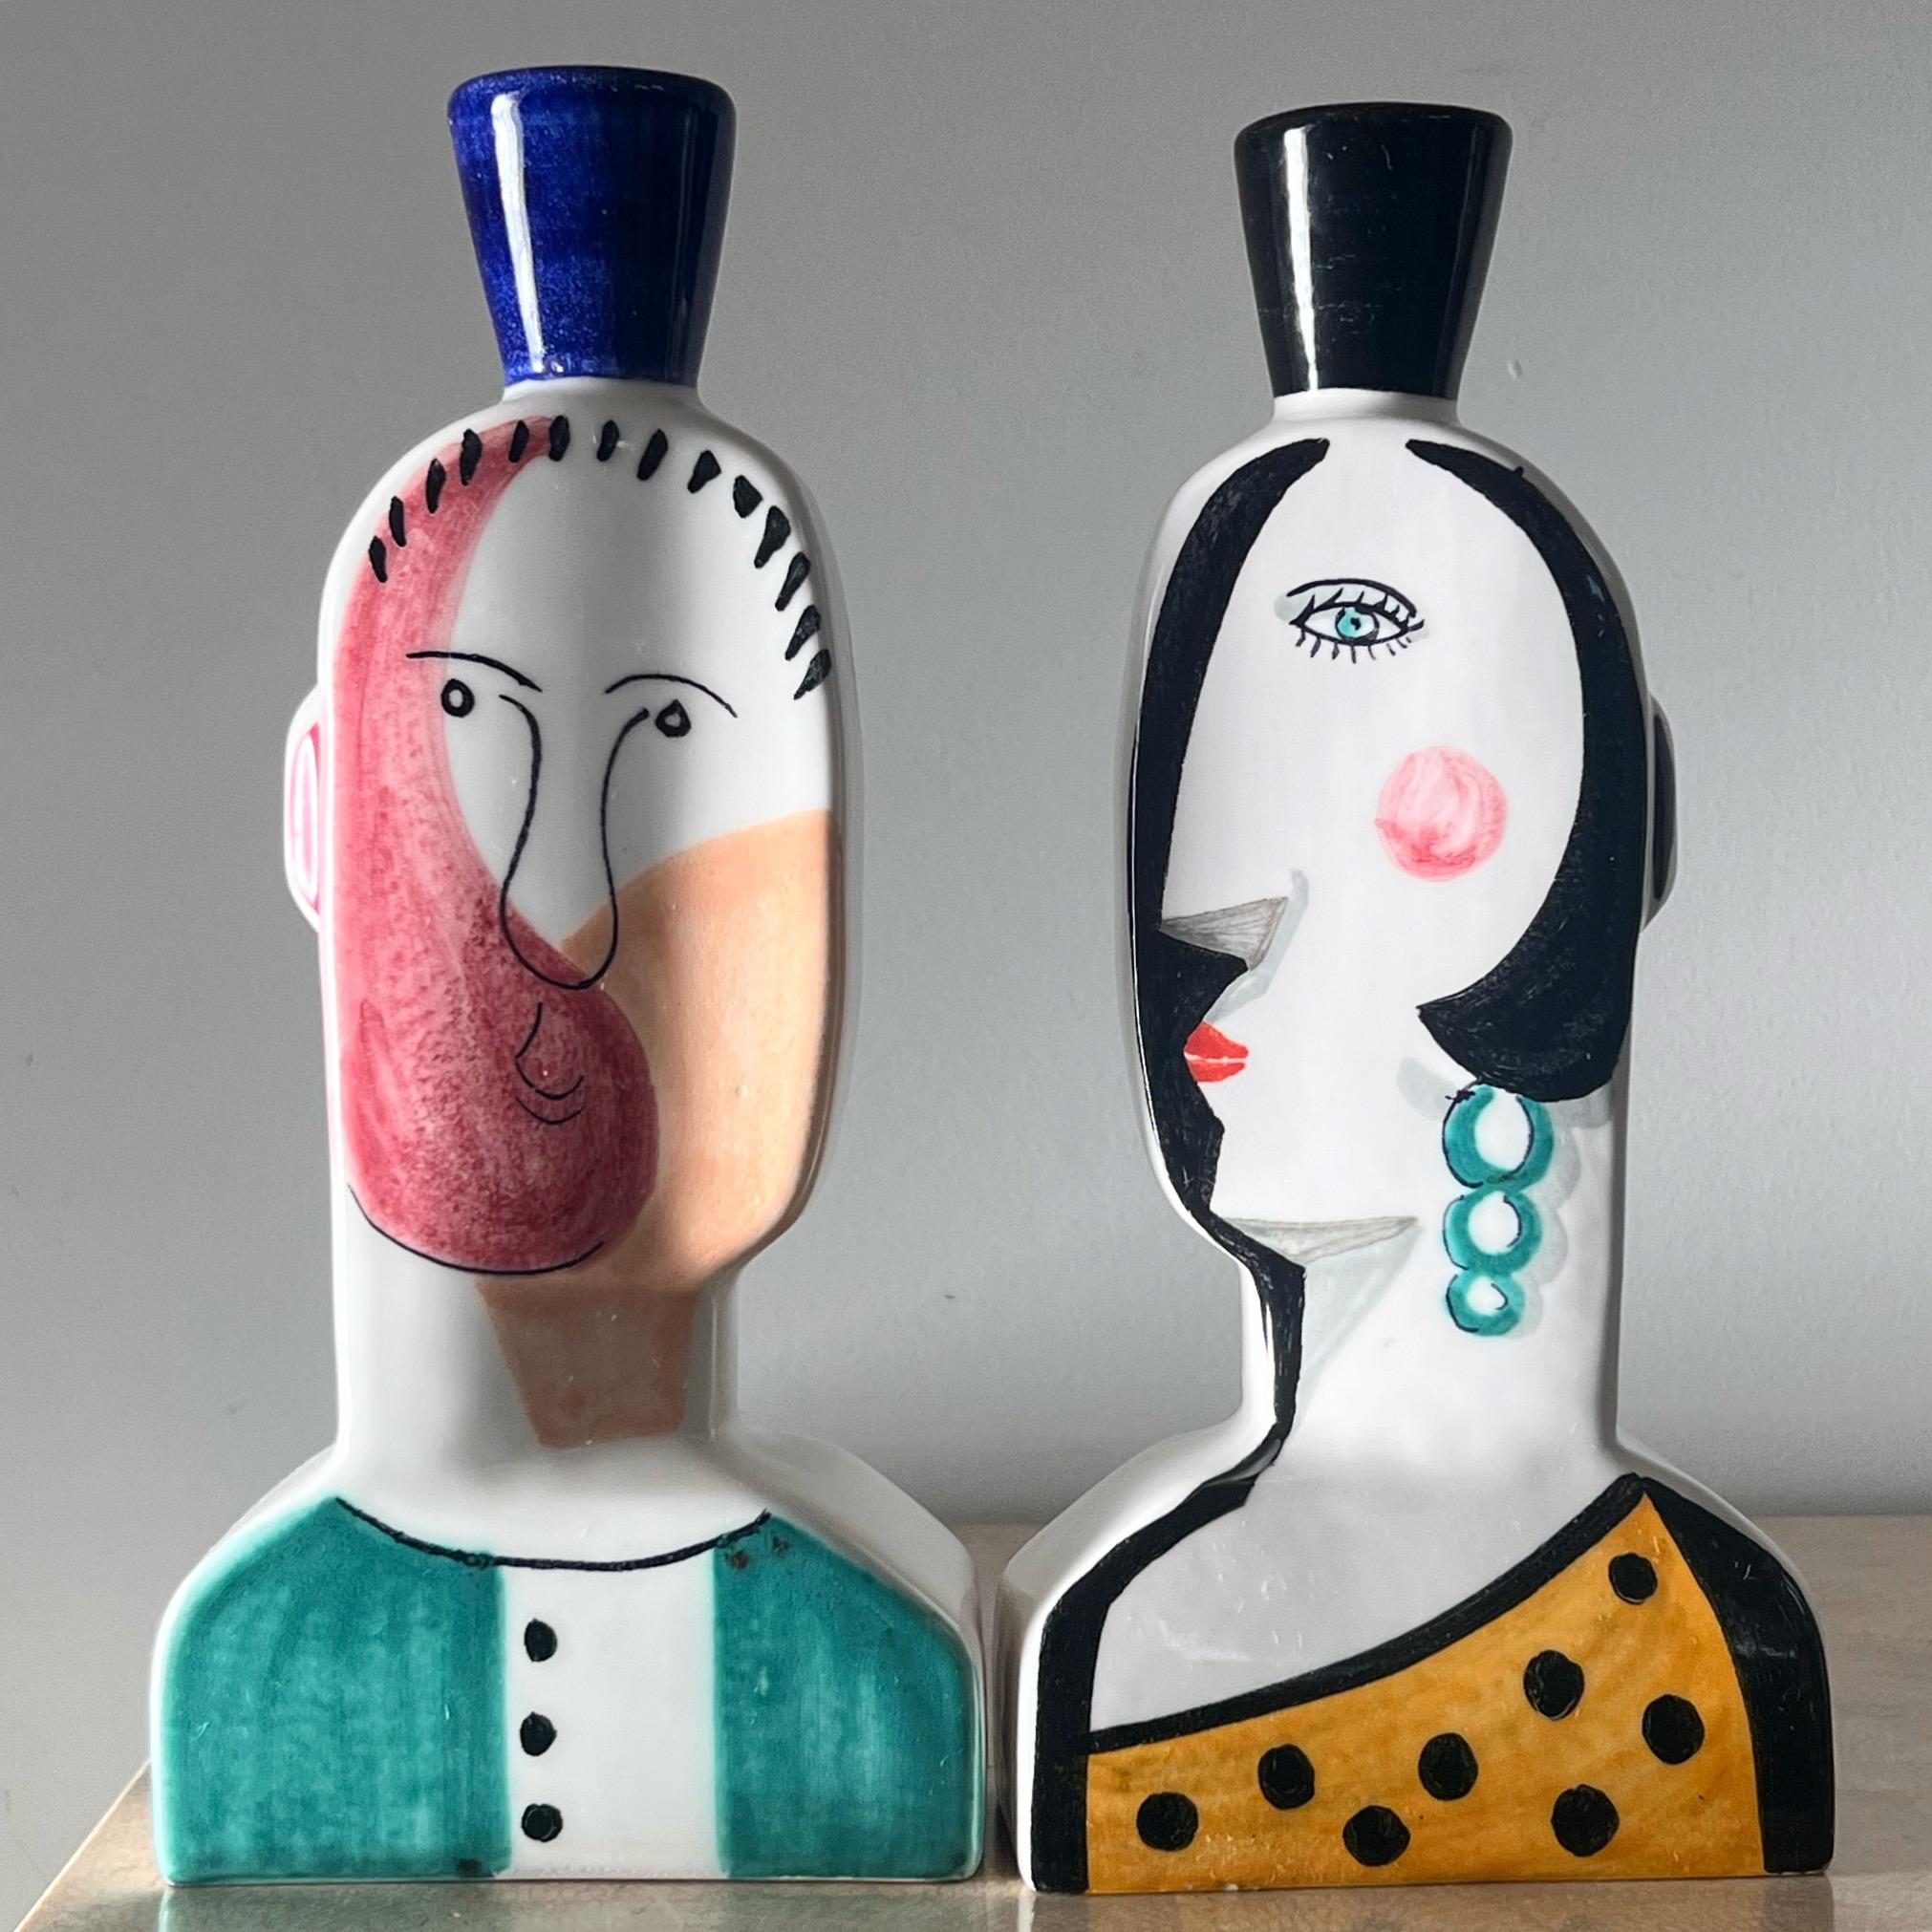 Spanish Cubist figurative “Face” candlesticks, signed by artist, 20th century 1